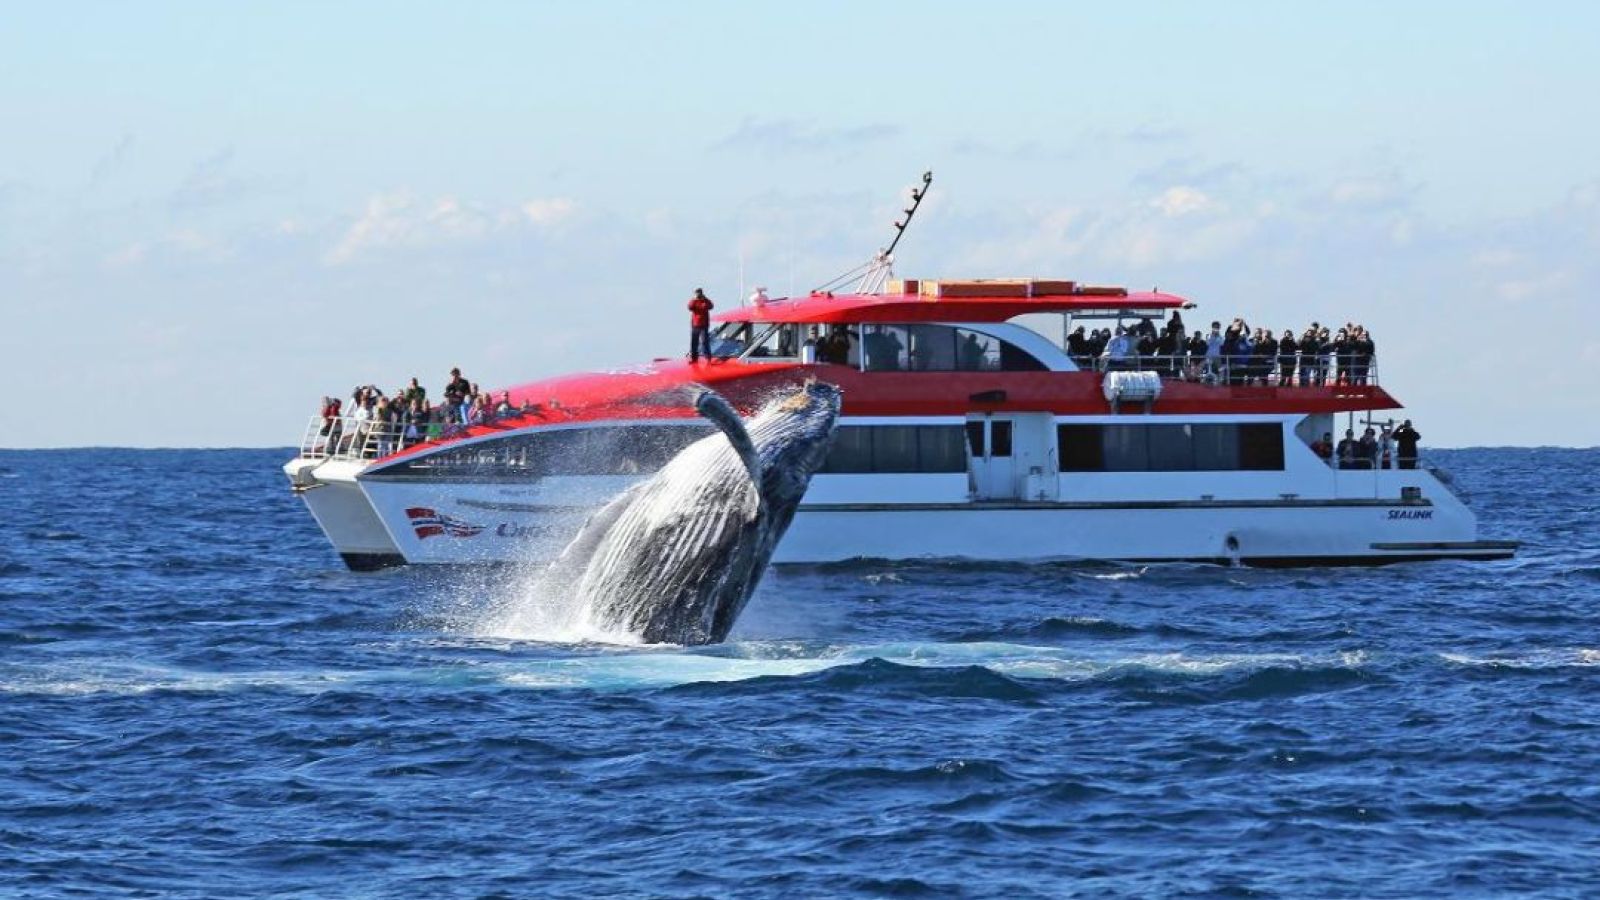 Whale watching cruise from Sydneey - boat watching whales play off Sydney Harbour